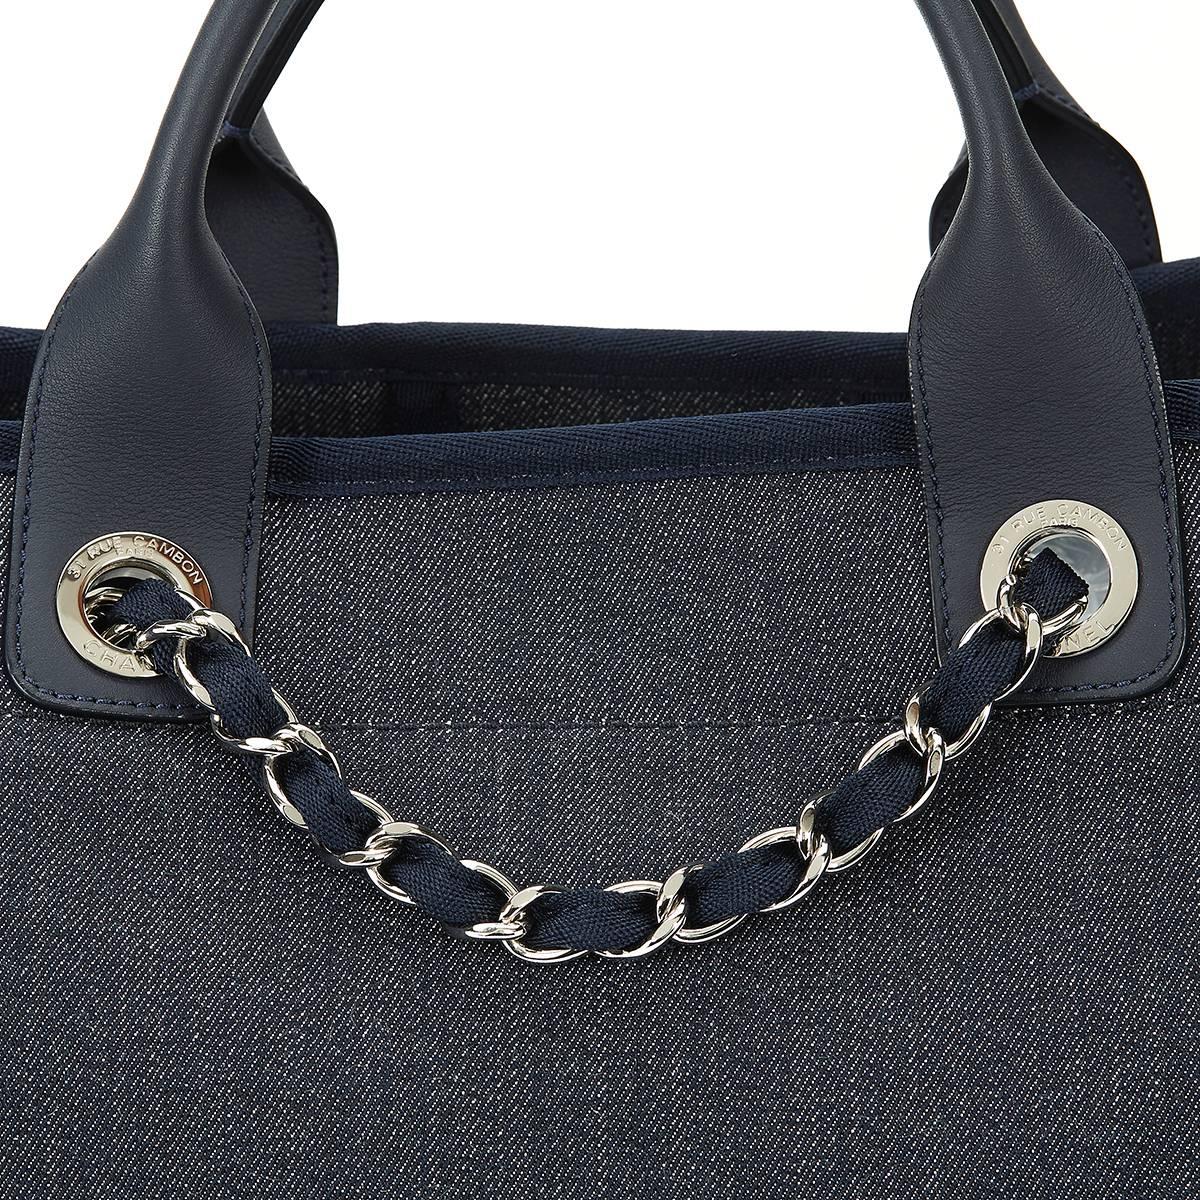 2014 Chanel Navy Canvas Large Deauville Tote 2